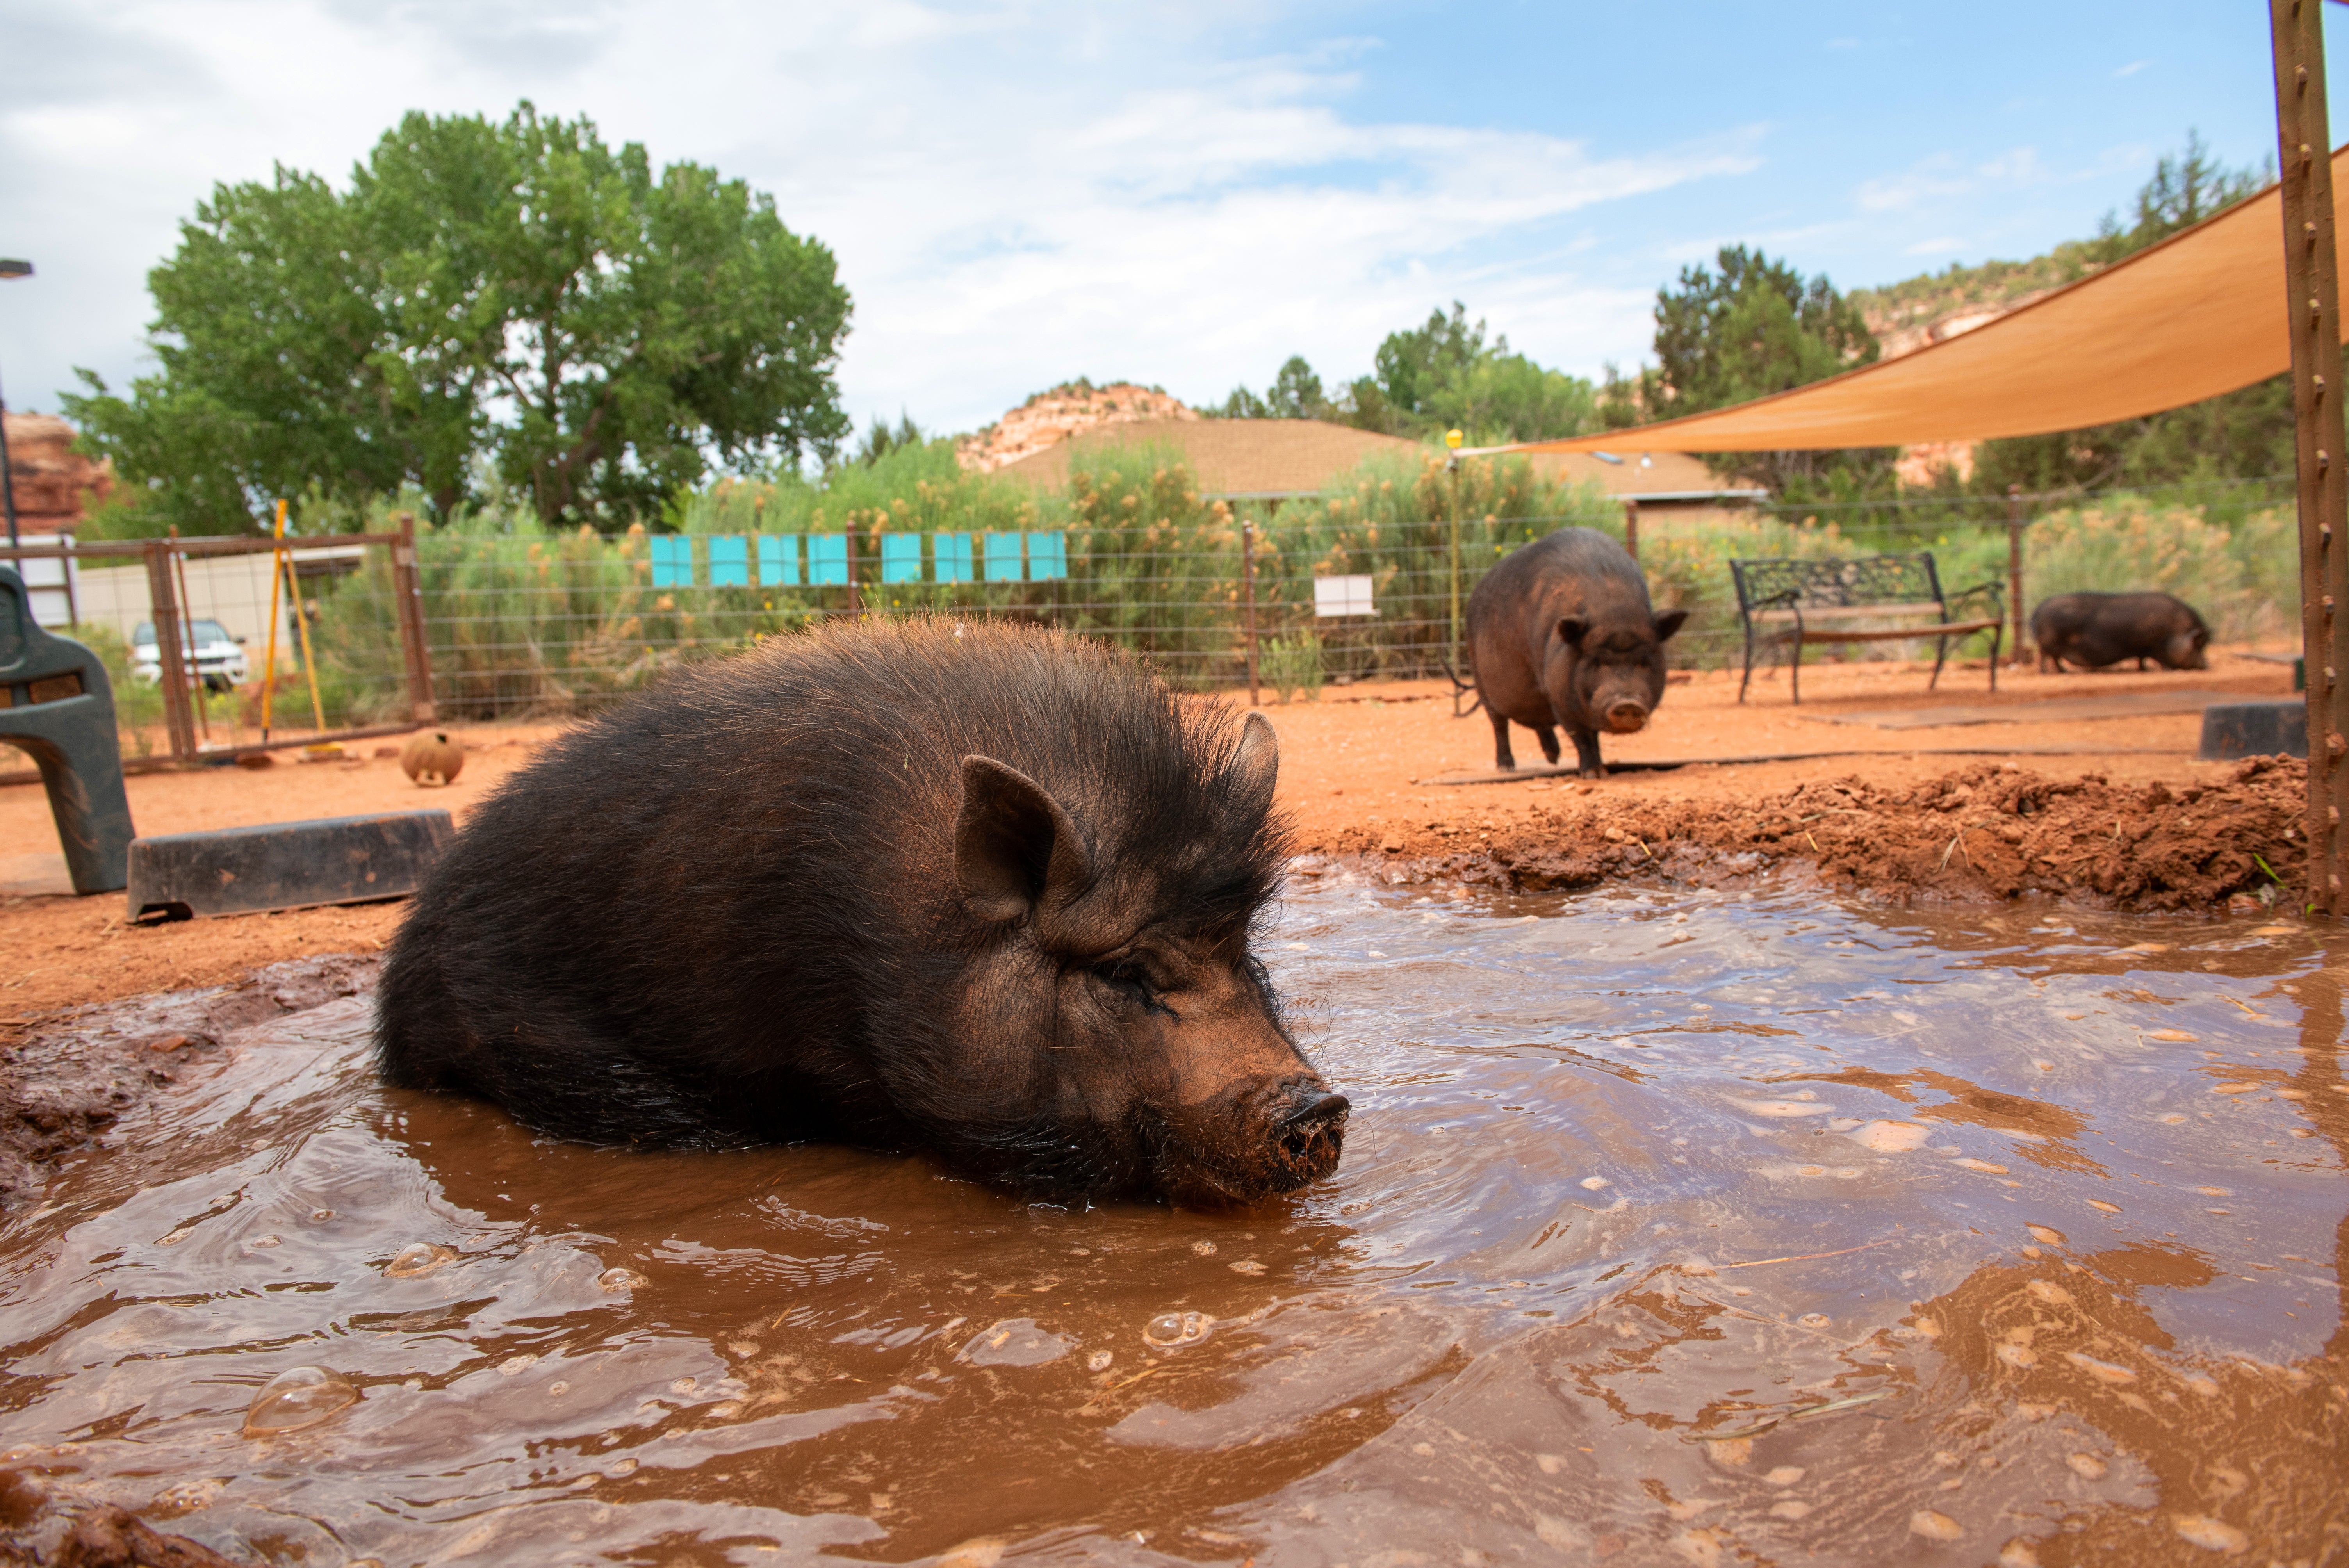 Pig sitting comfortably in a refreshing pool of water while another pig looks on